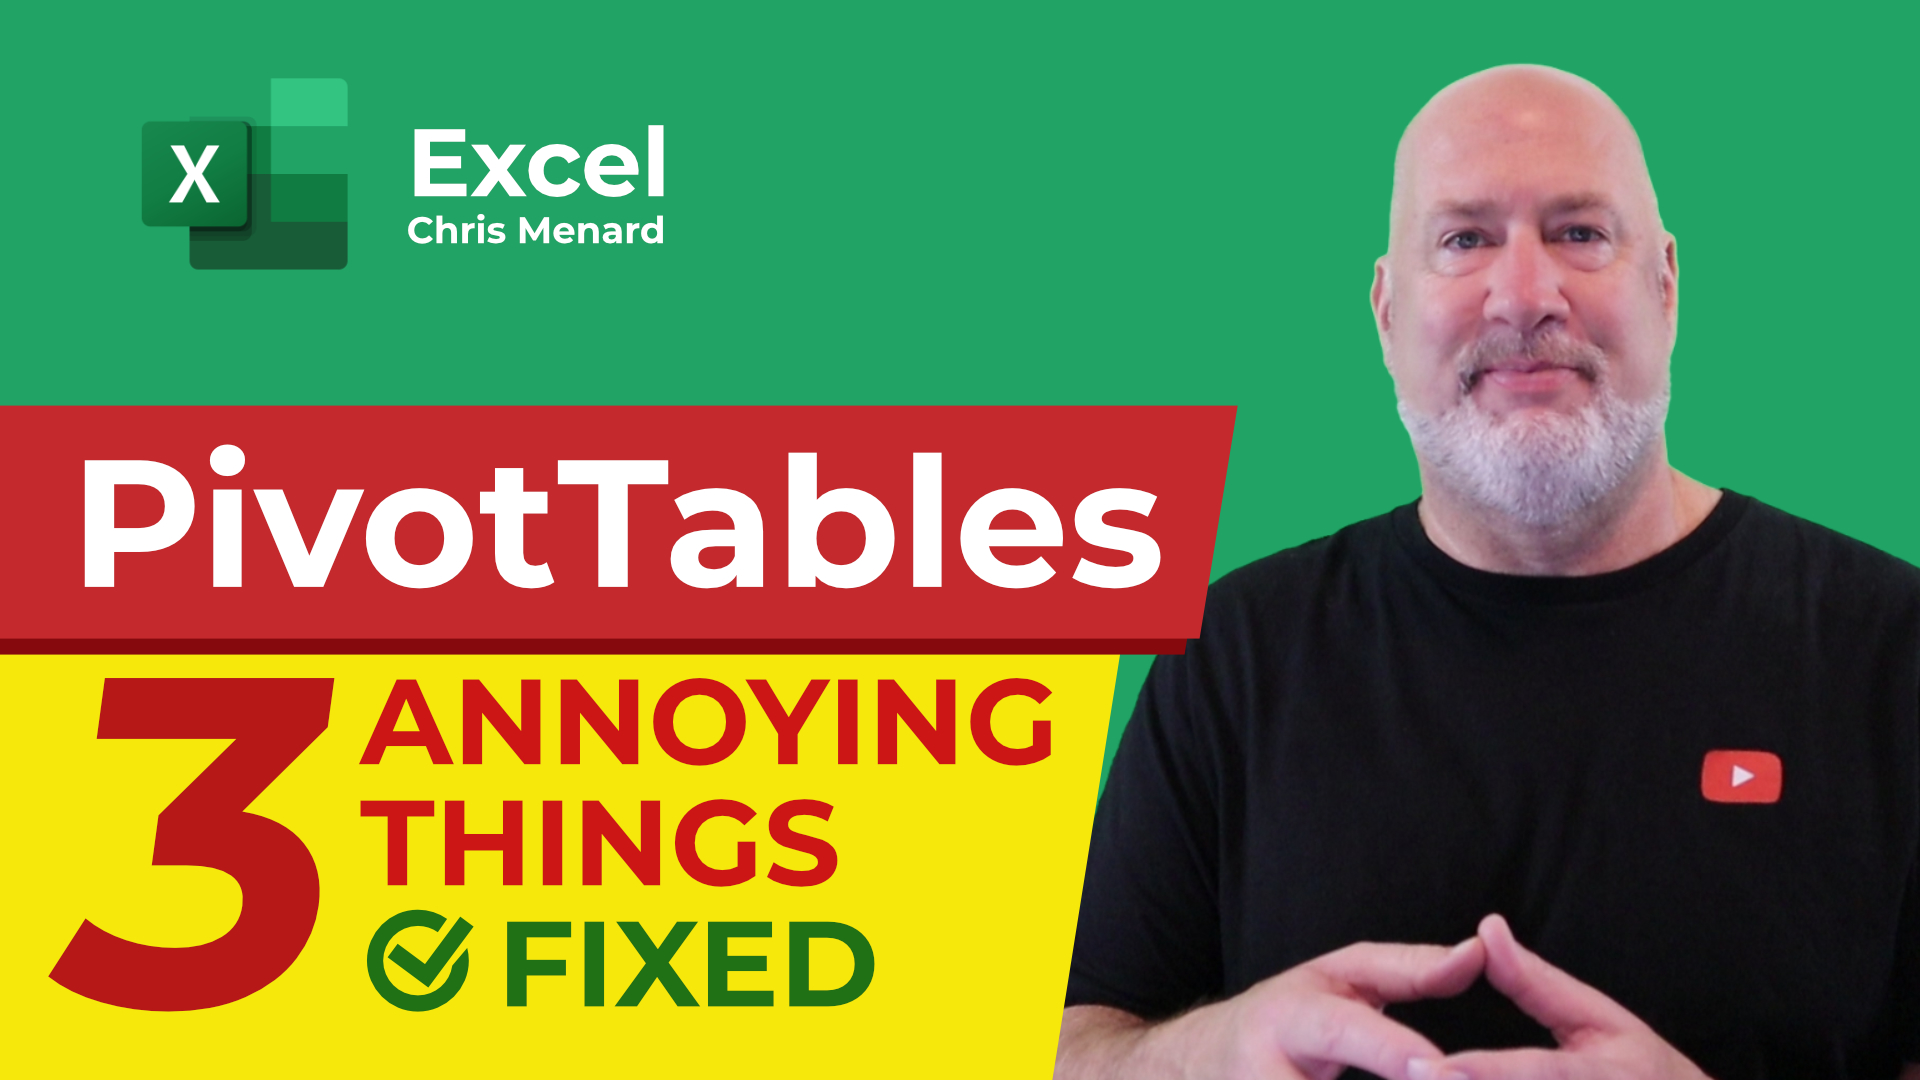 PivotTables - 3 Annoying Things FIXED!